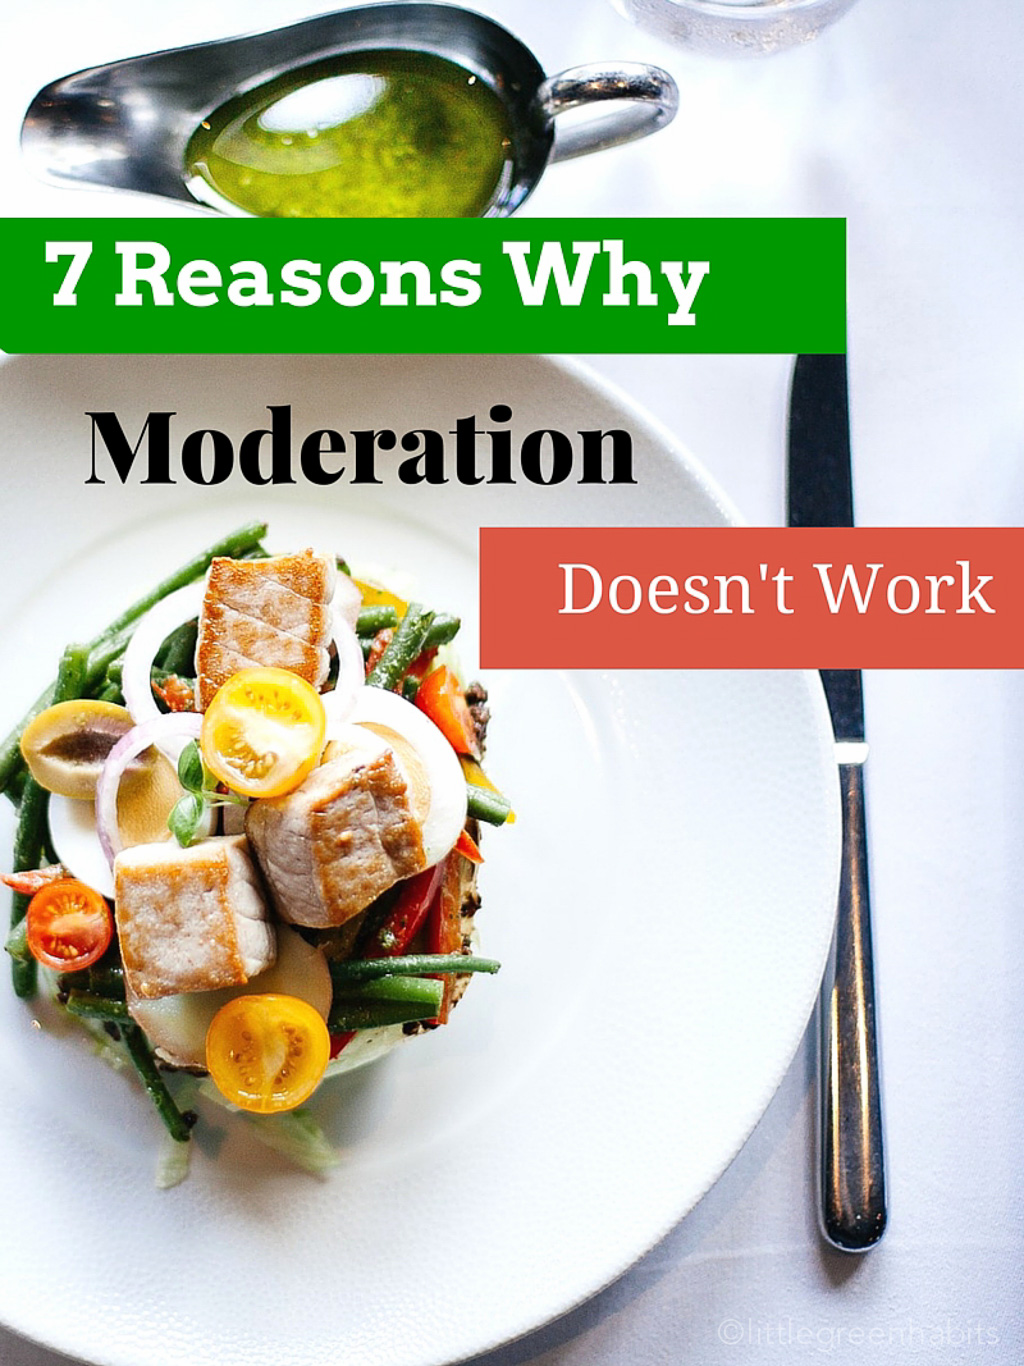 7 reasons why moderation doesn’t work